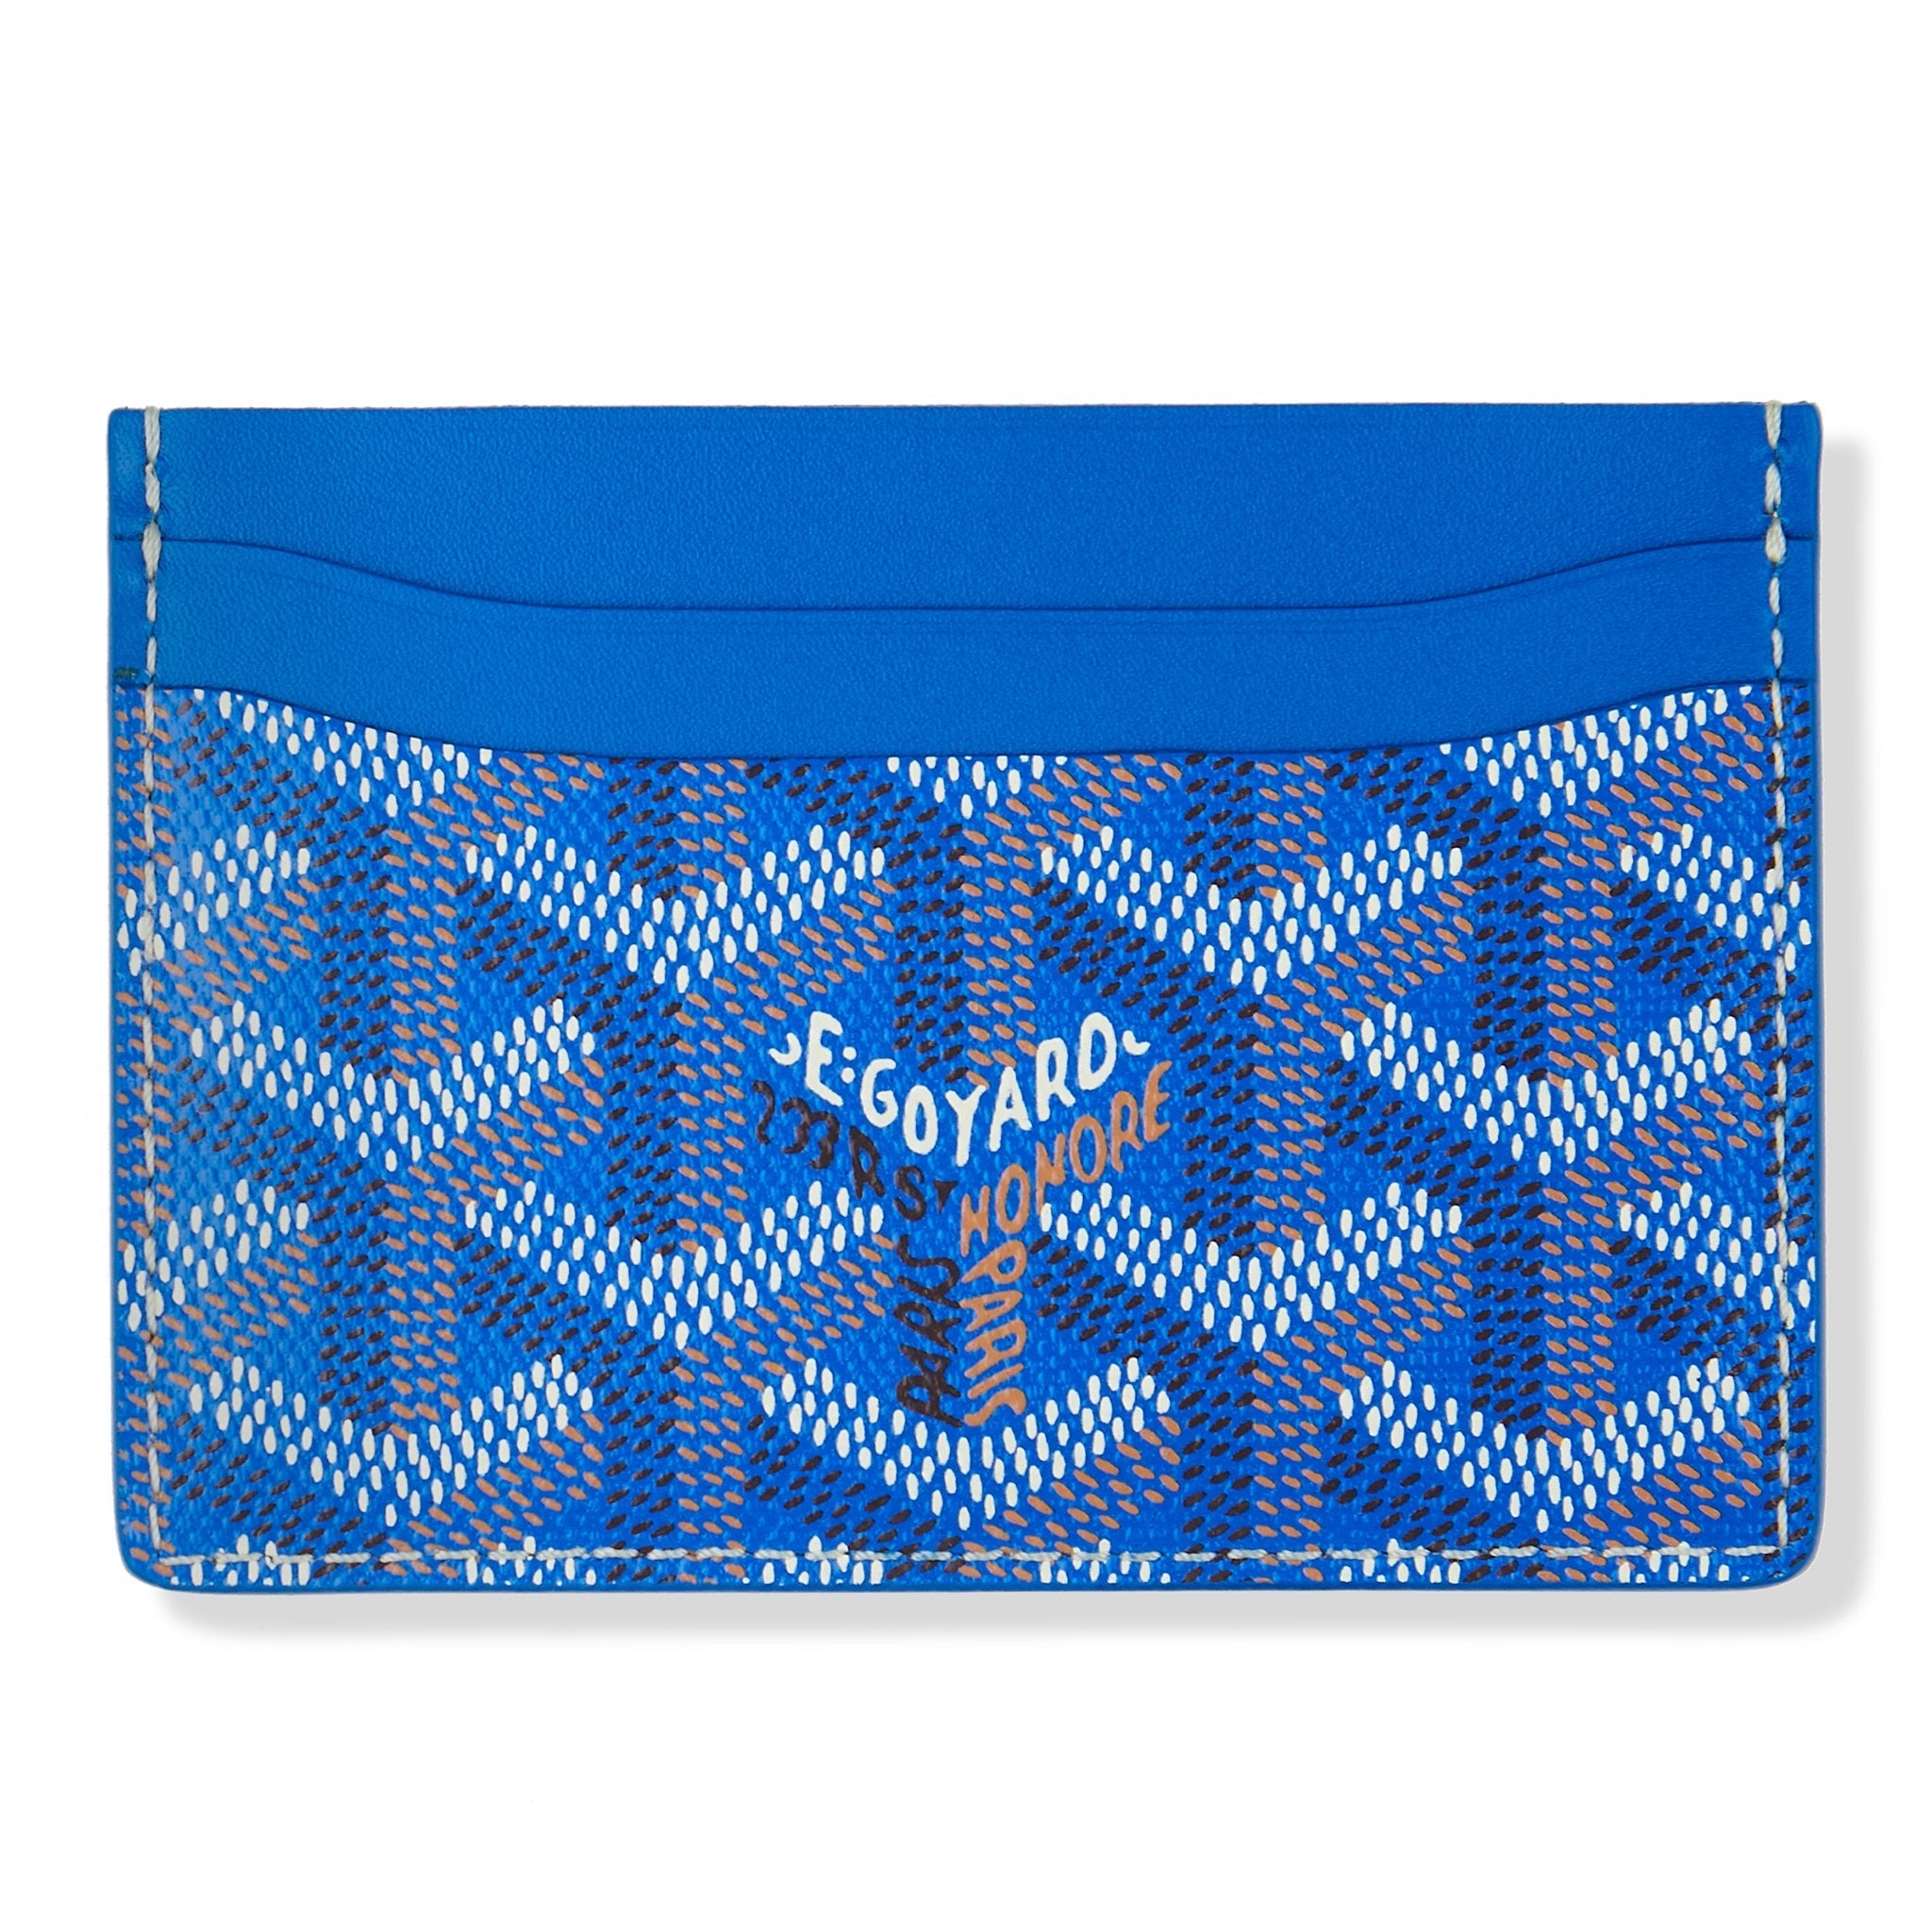 Very Unique Card Holder From GOYARD - Saint Sulpice [88Reviews